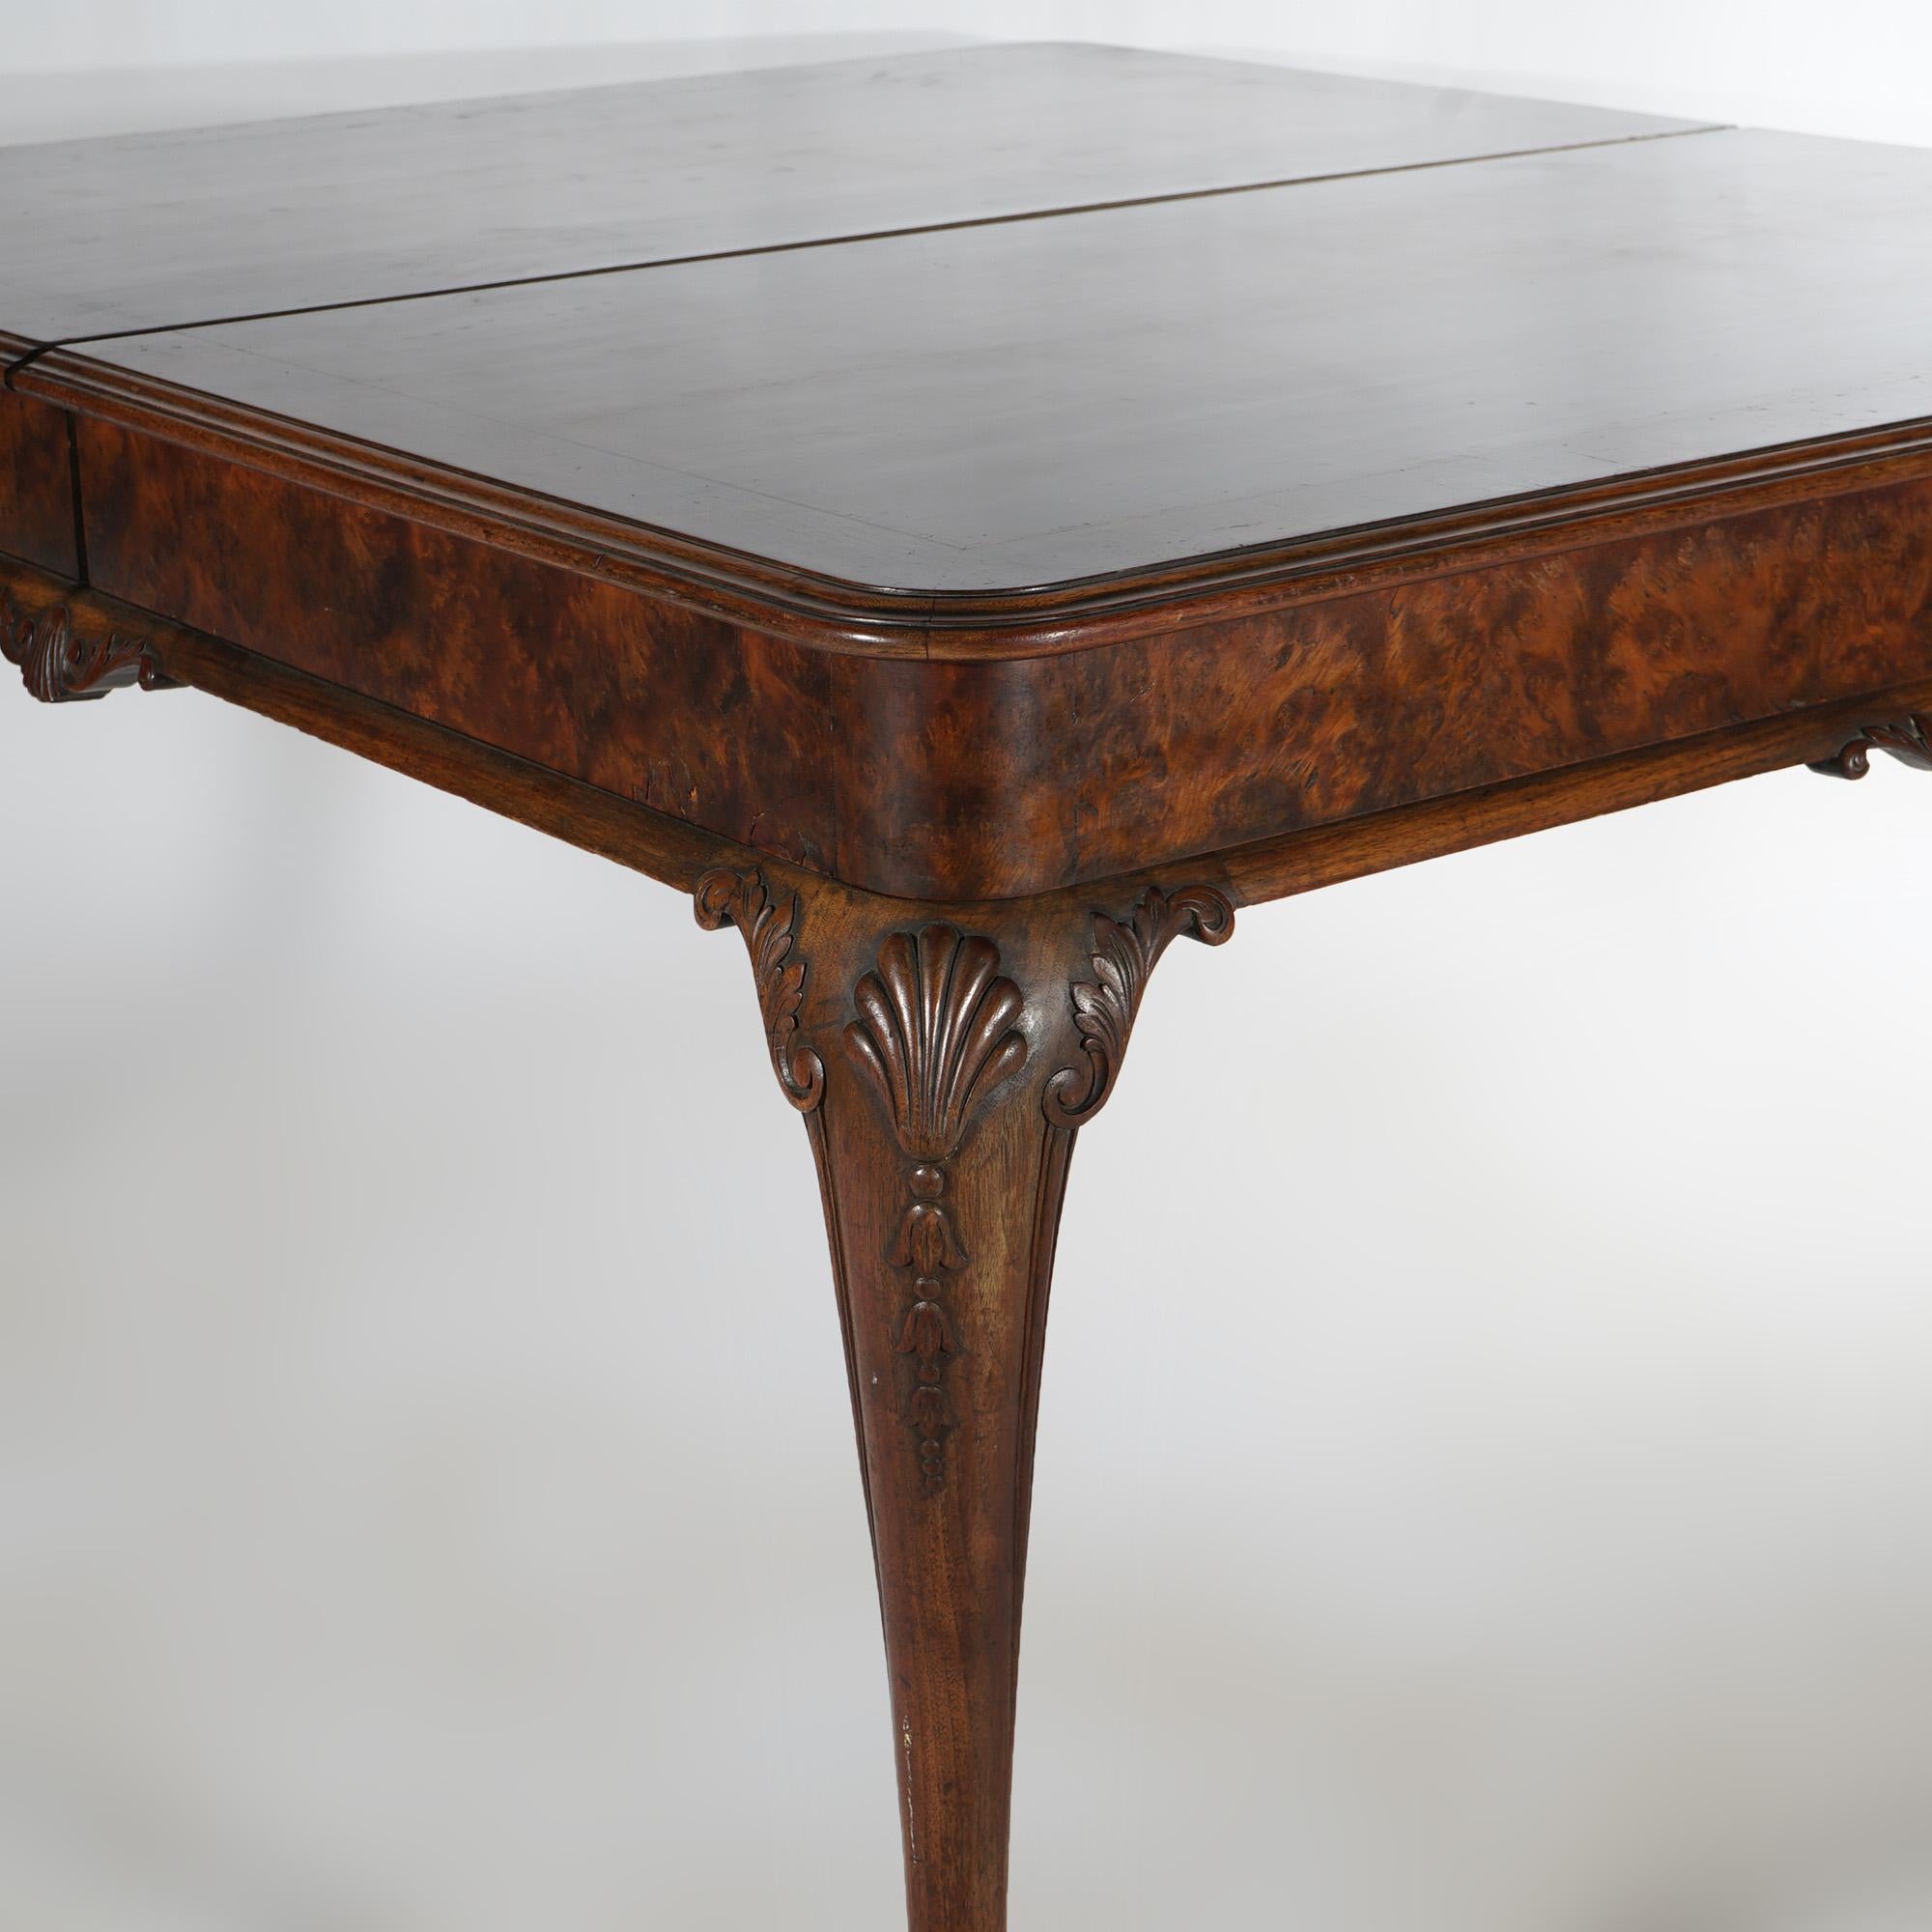 Inlay Antique Queen Anne Style Mahogany Banded Inlaid Dining Table & Two Leaves 1930 For Sale